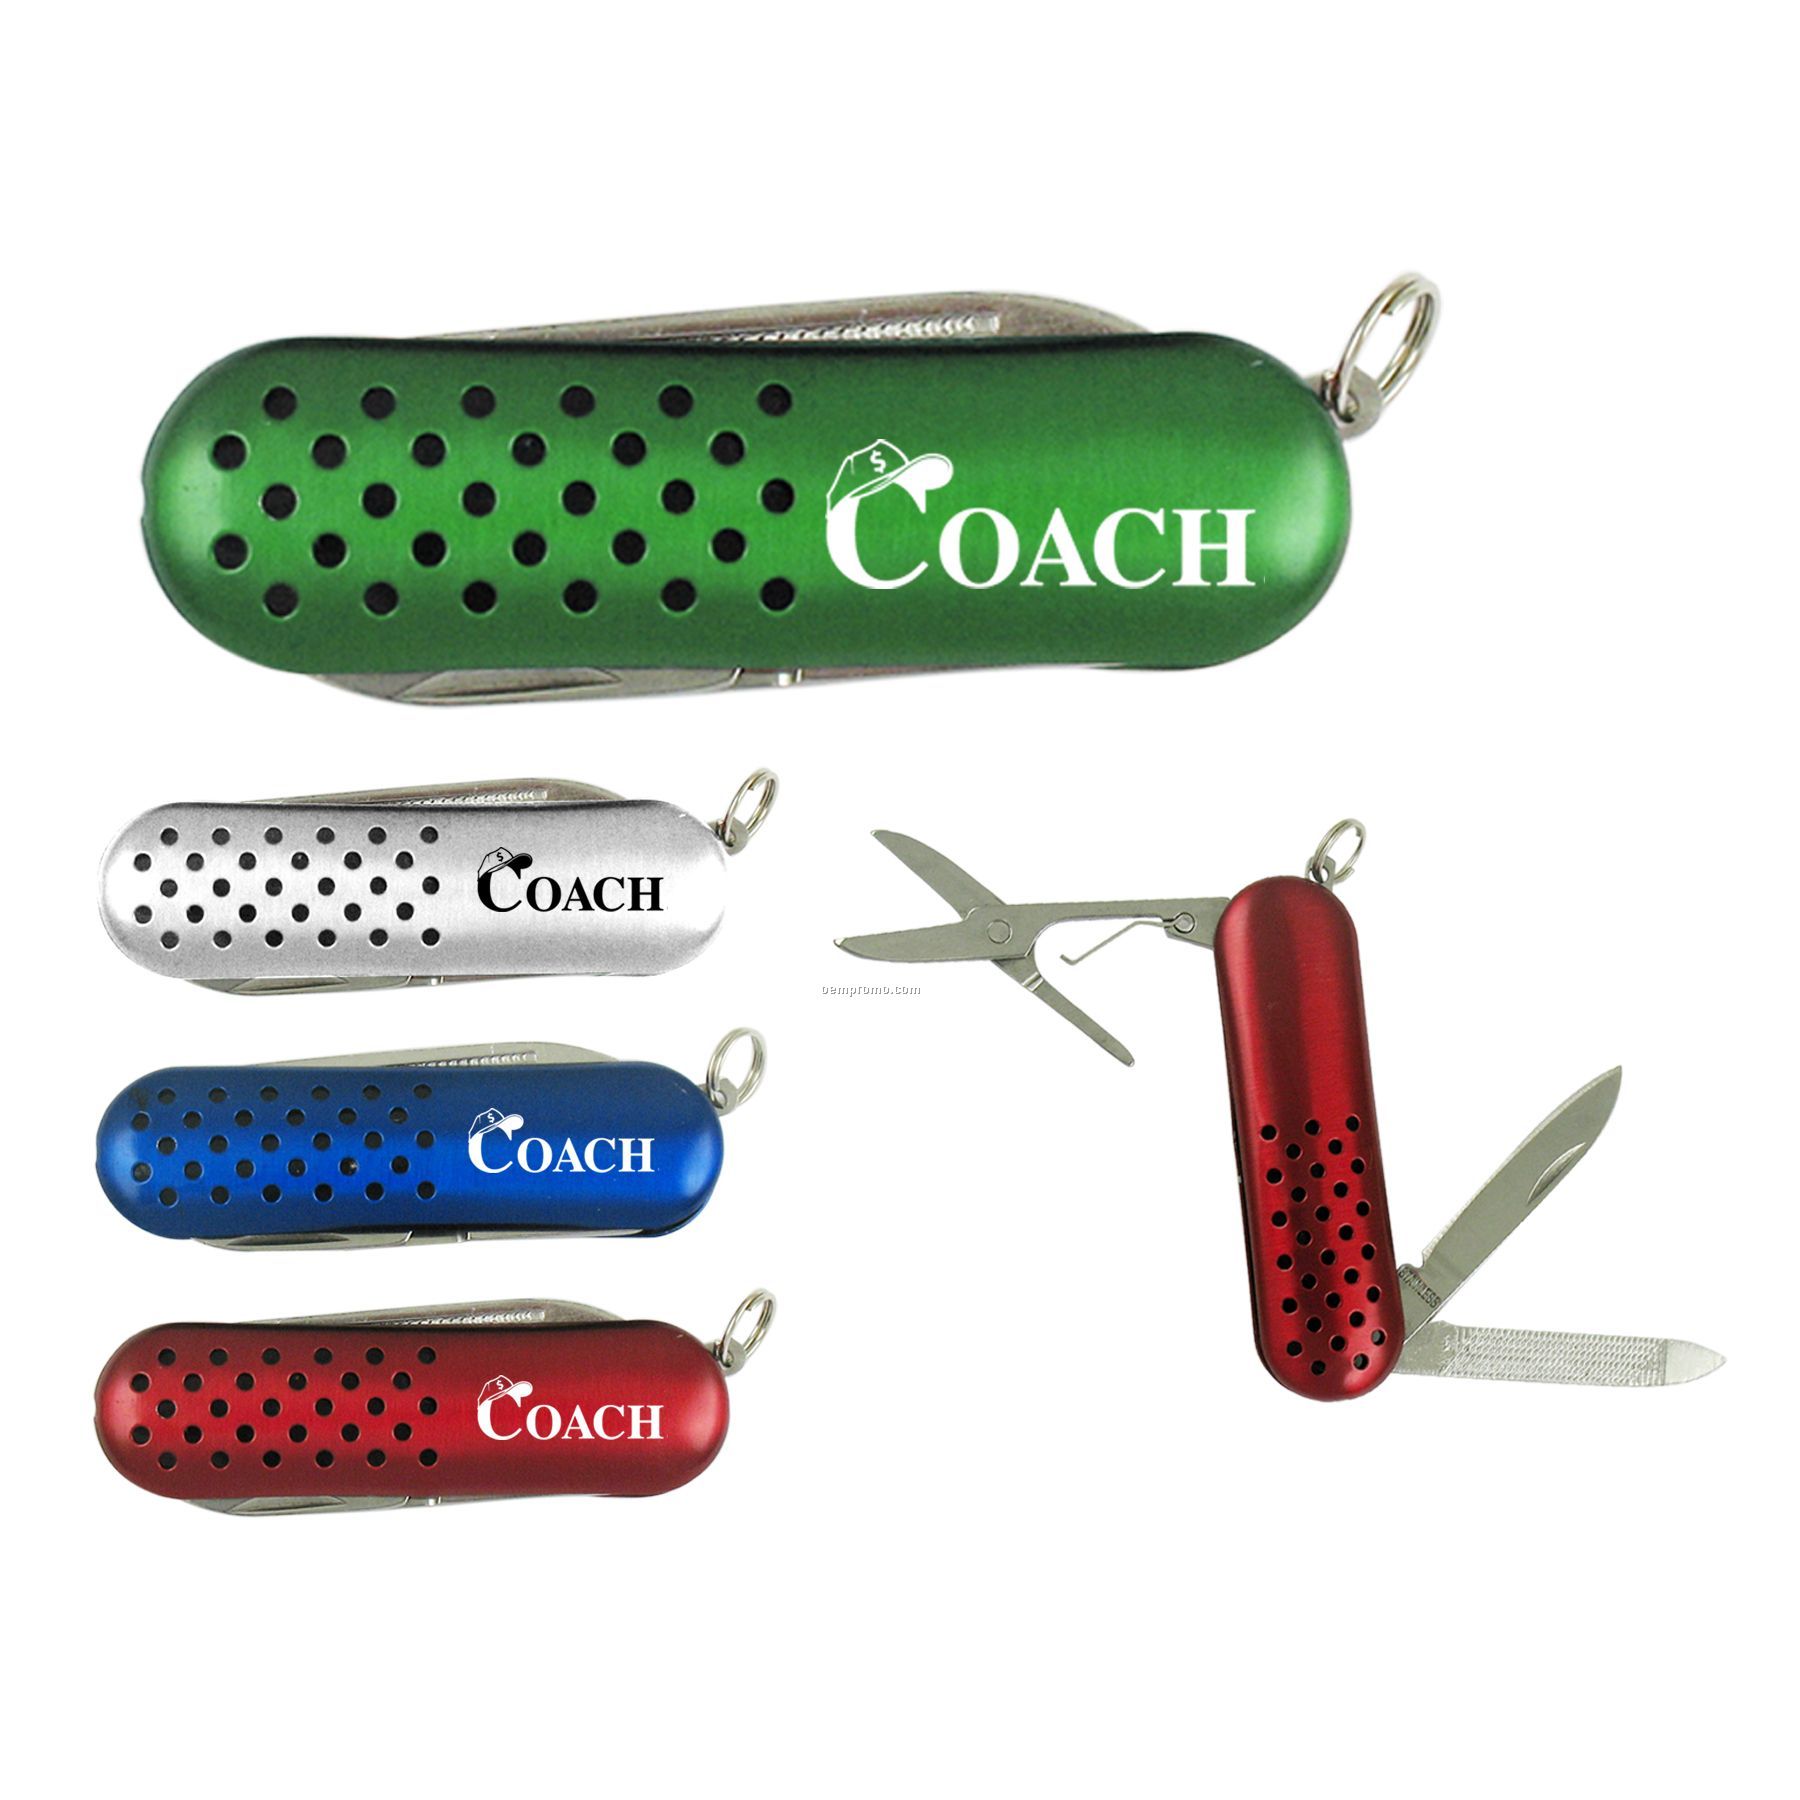 Ackart Mini 3 Function Tool With Keyring